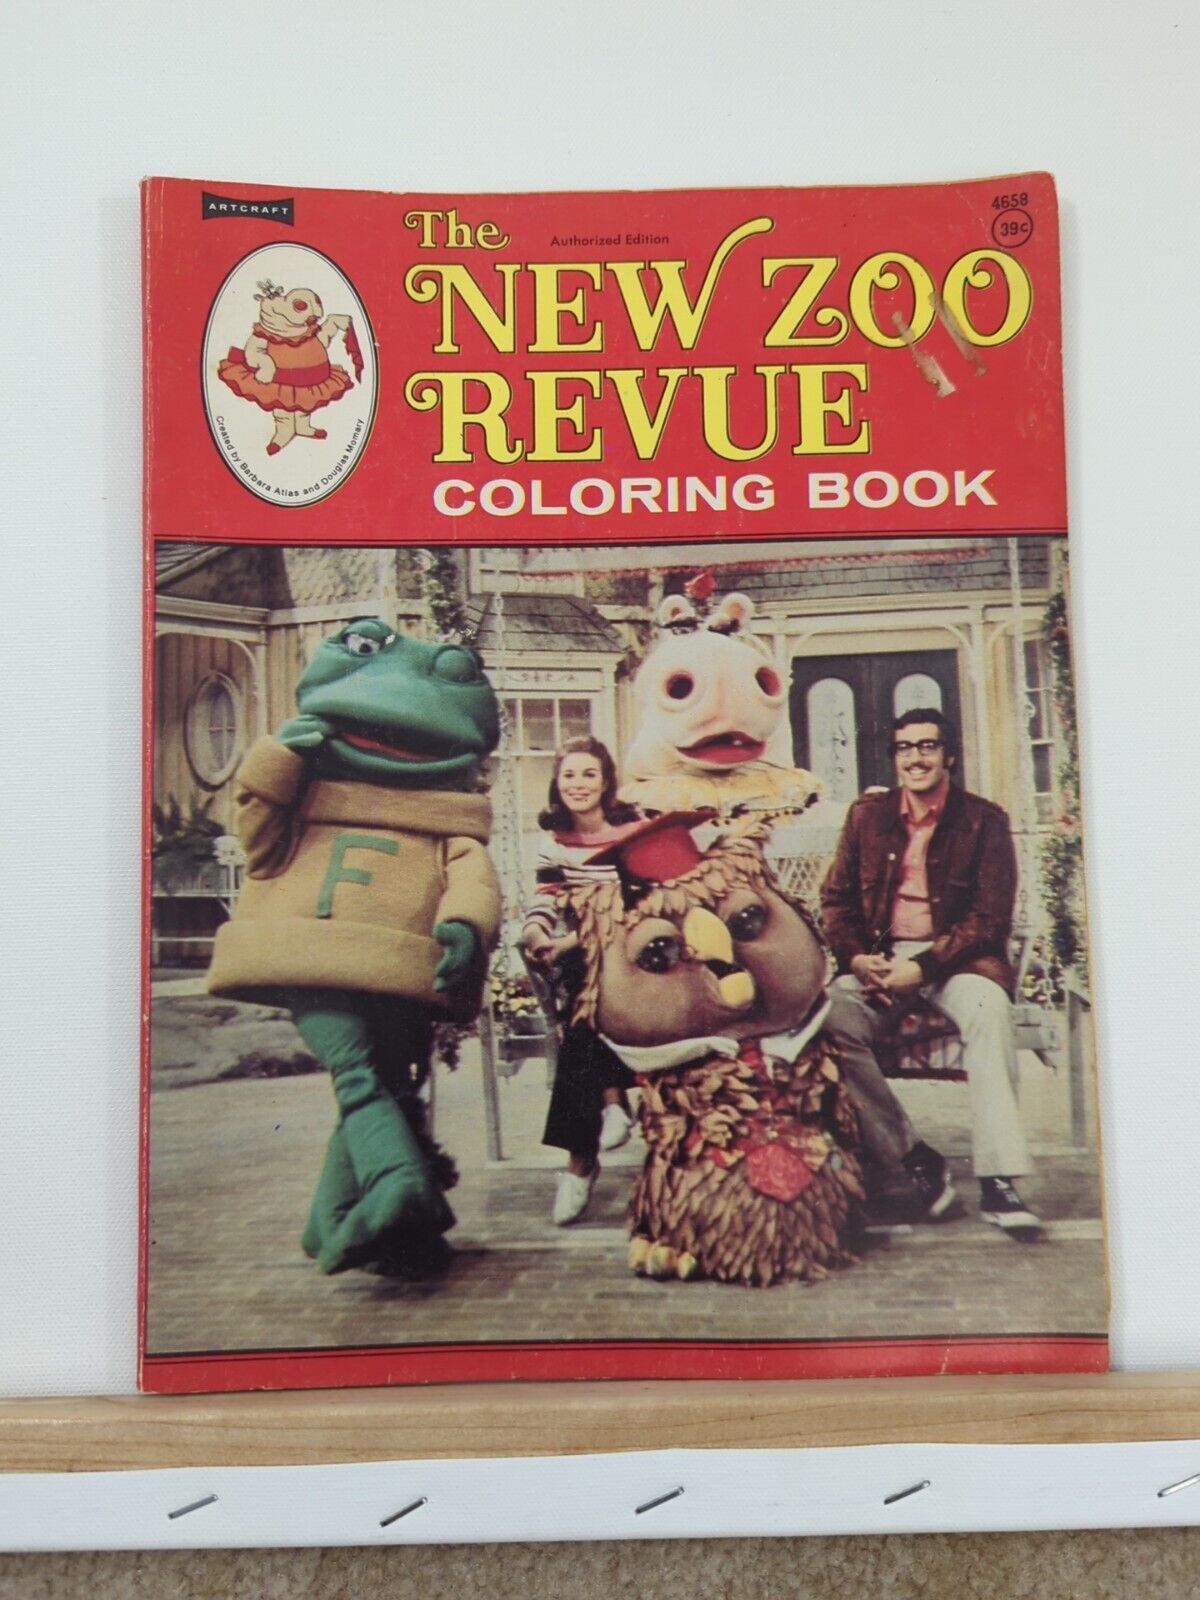 Vintage 1973 The New Zoo Revue Coloring Book New Saalfield Used But GOOD COND